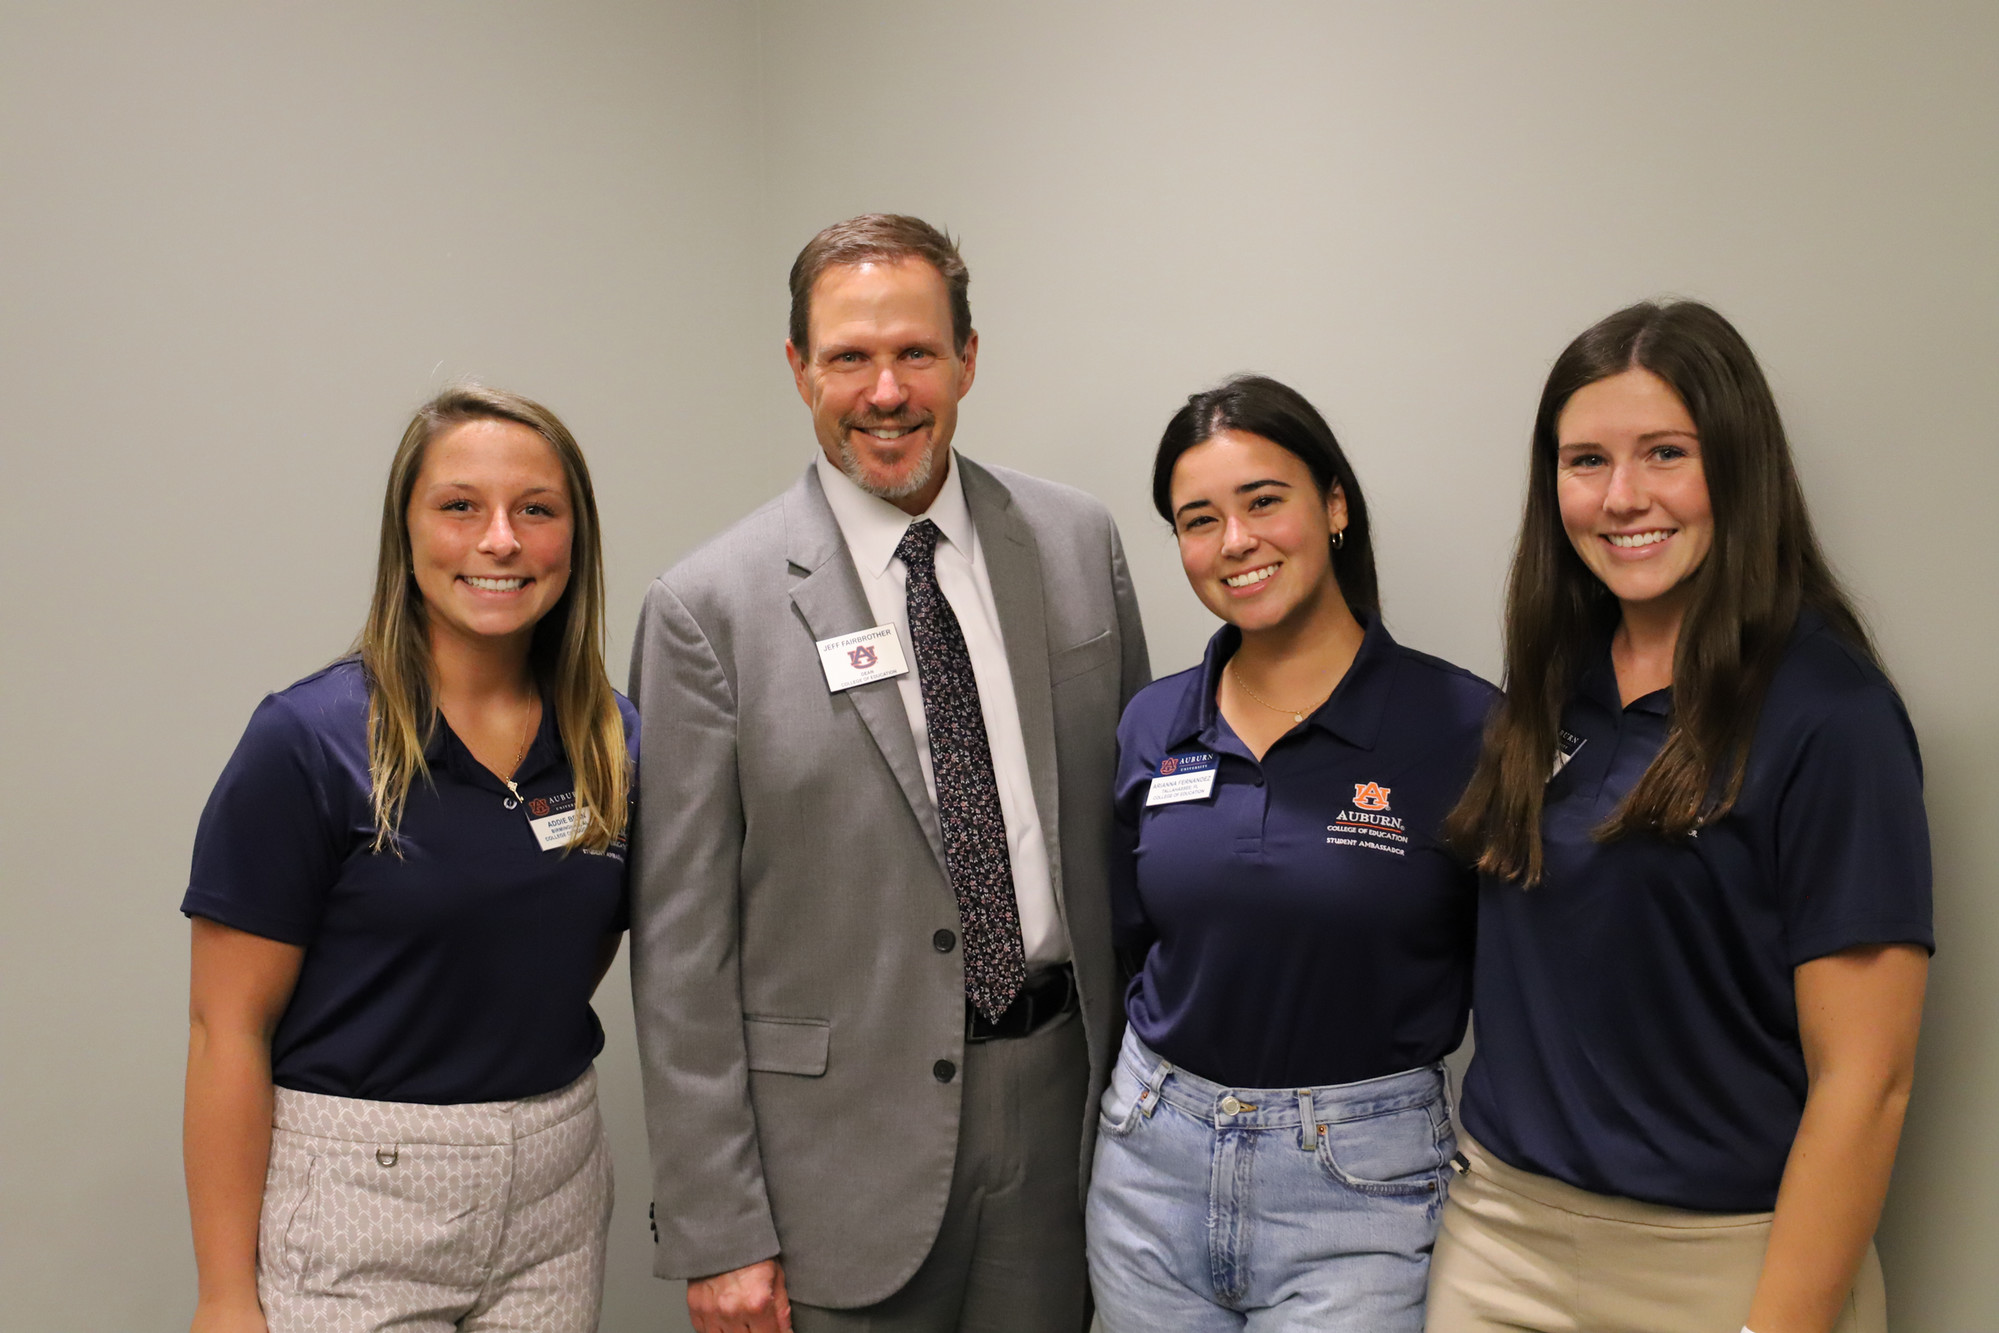 student ambassadors and the dean